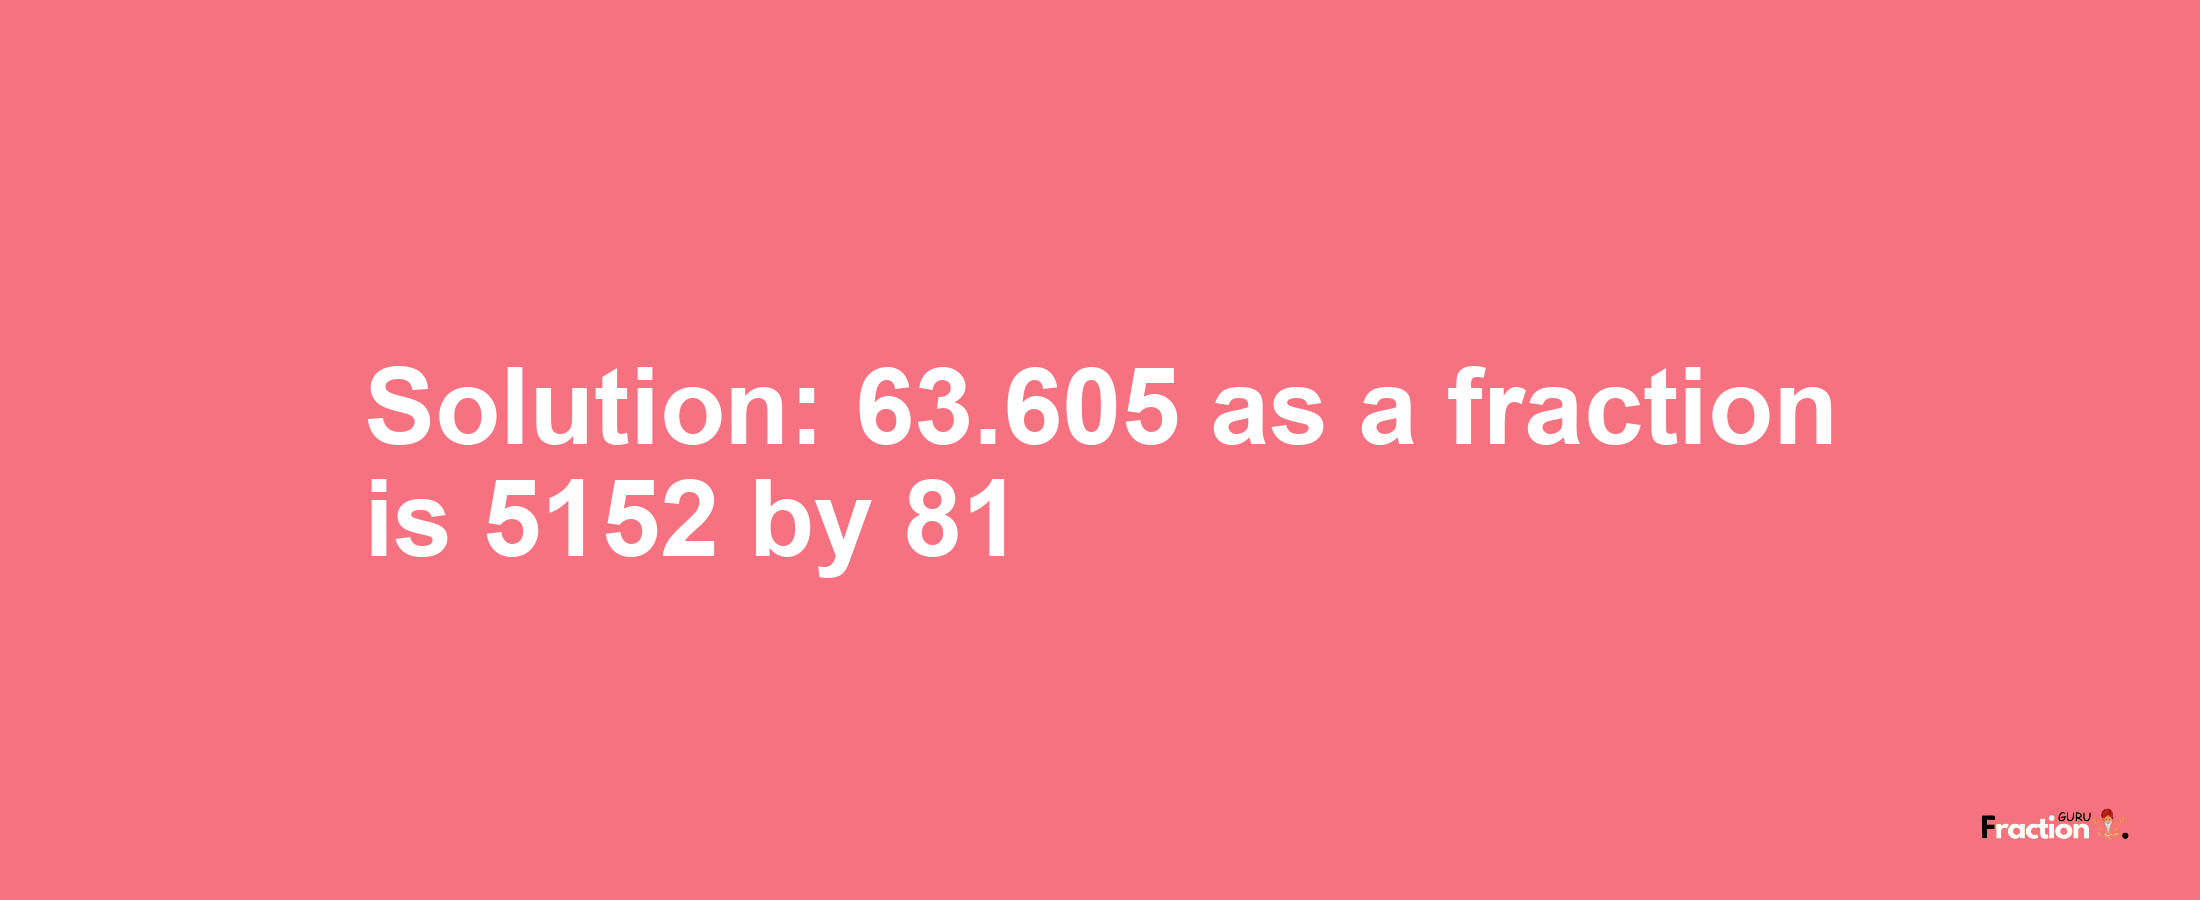 Solution:63.605 as a fraction is 5152/81